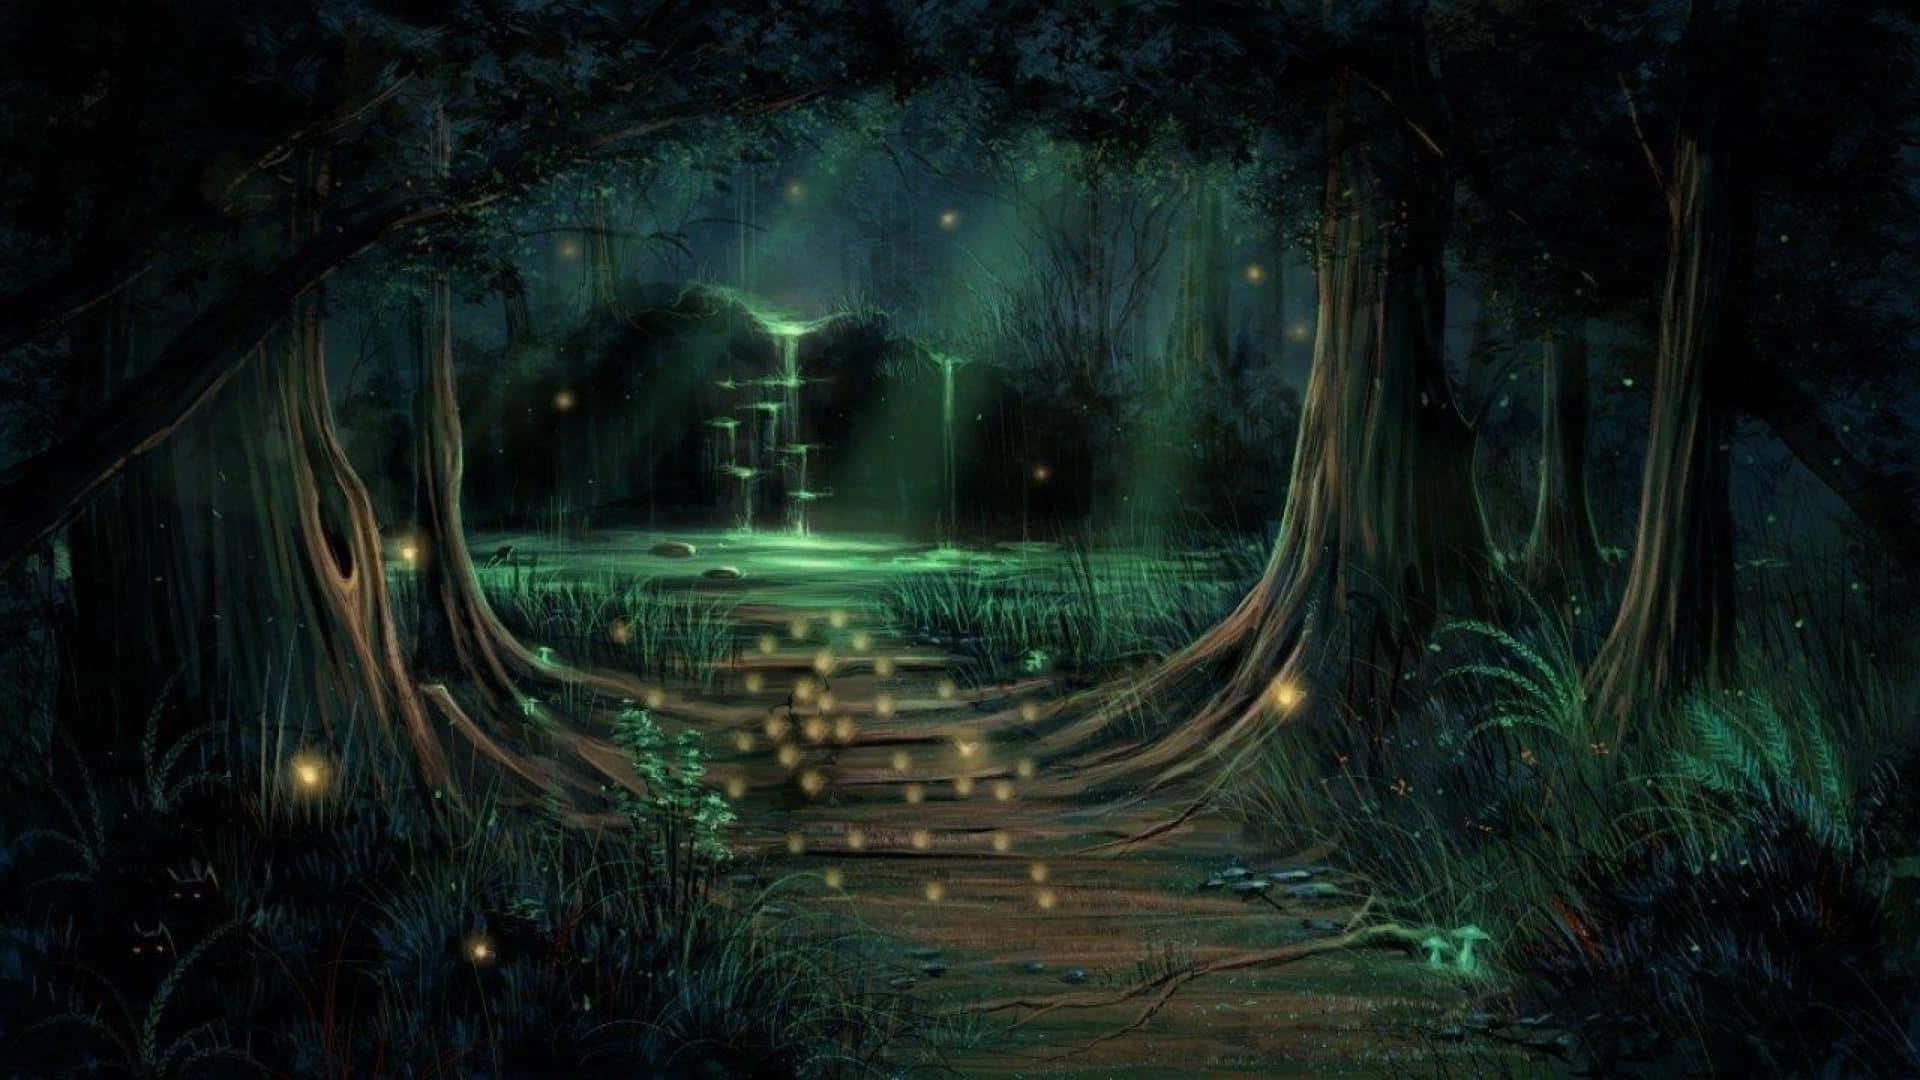 Caption: Mystical Enchanted Forest at Twilight Wallpaper